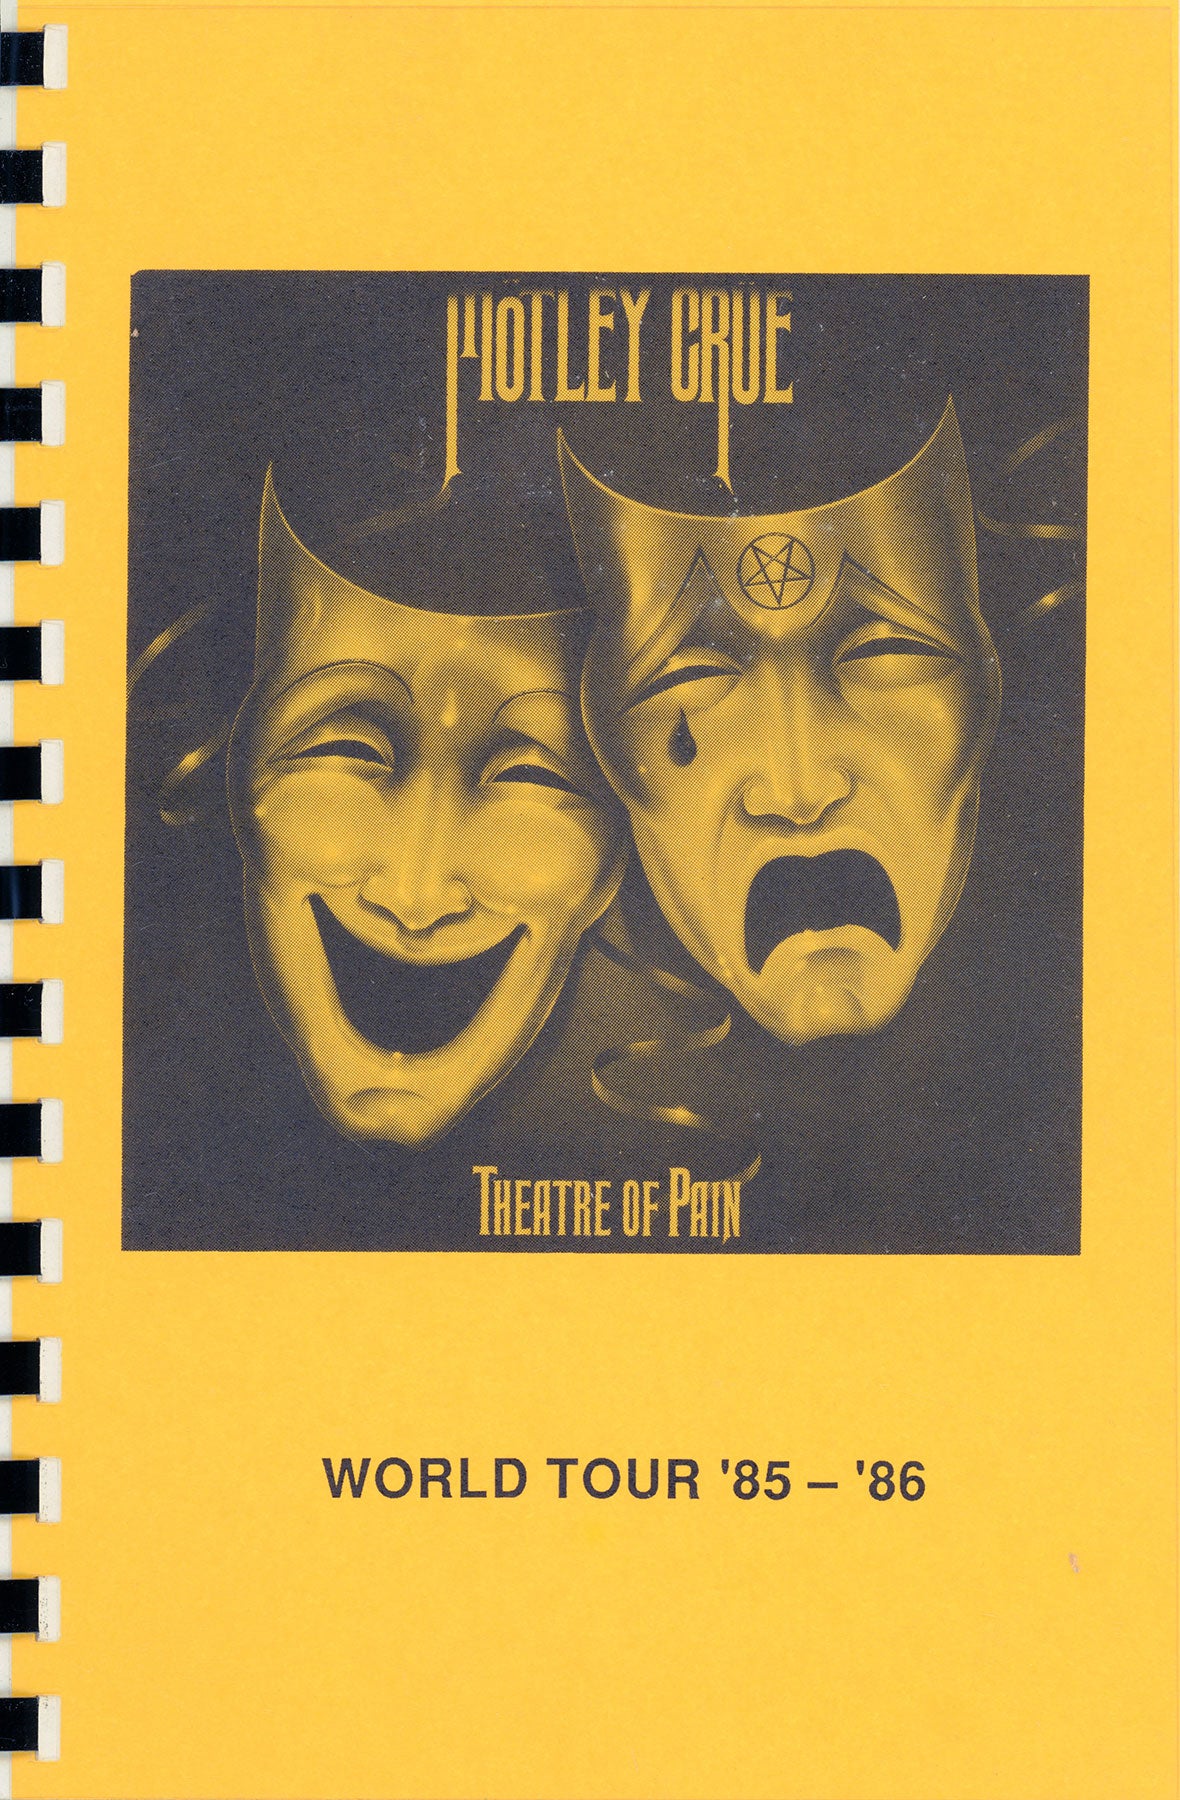 Nikki Sixx's itinerary tour book for Theatre of Pain World Tour starting in Japan 1985-1986